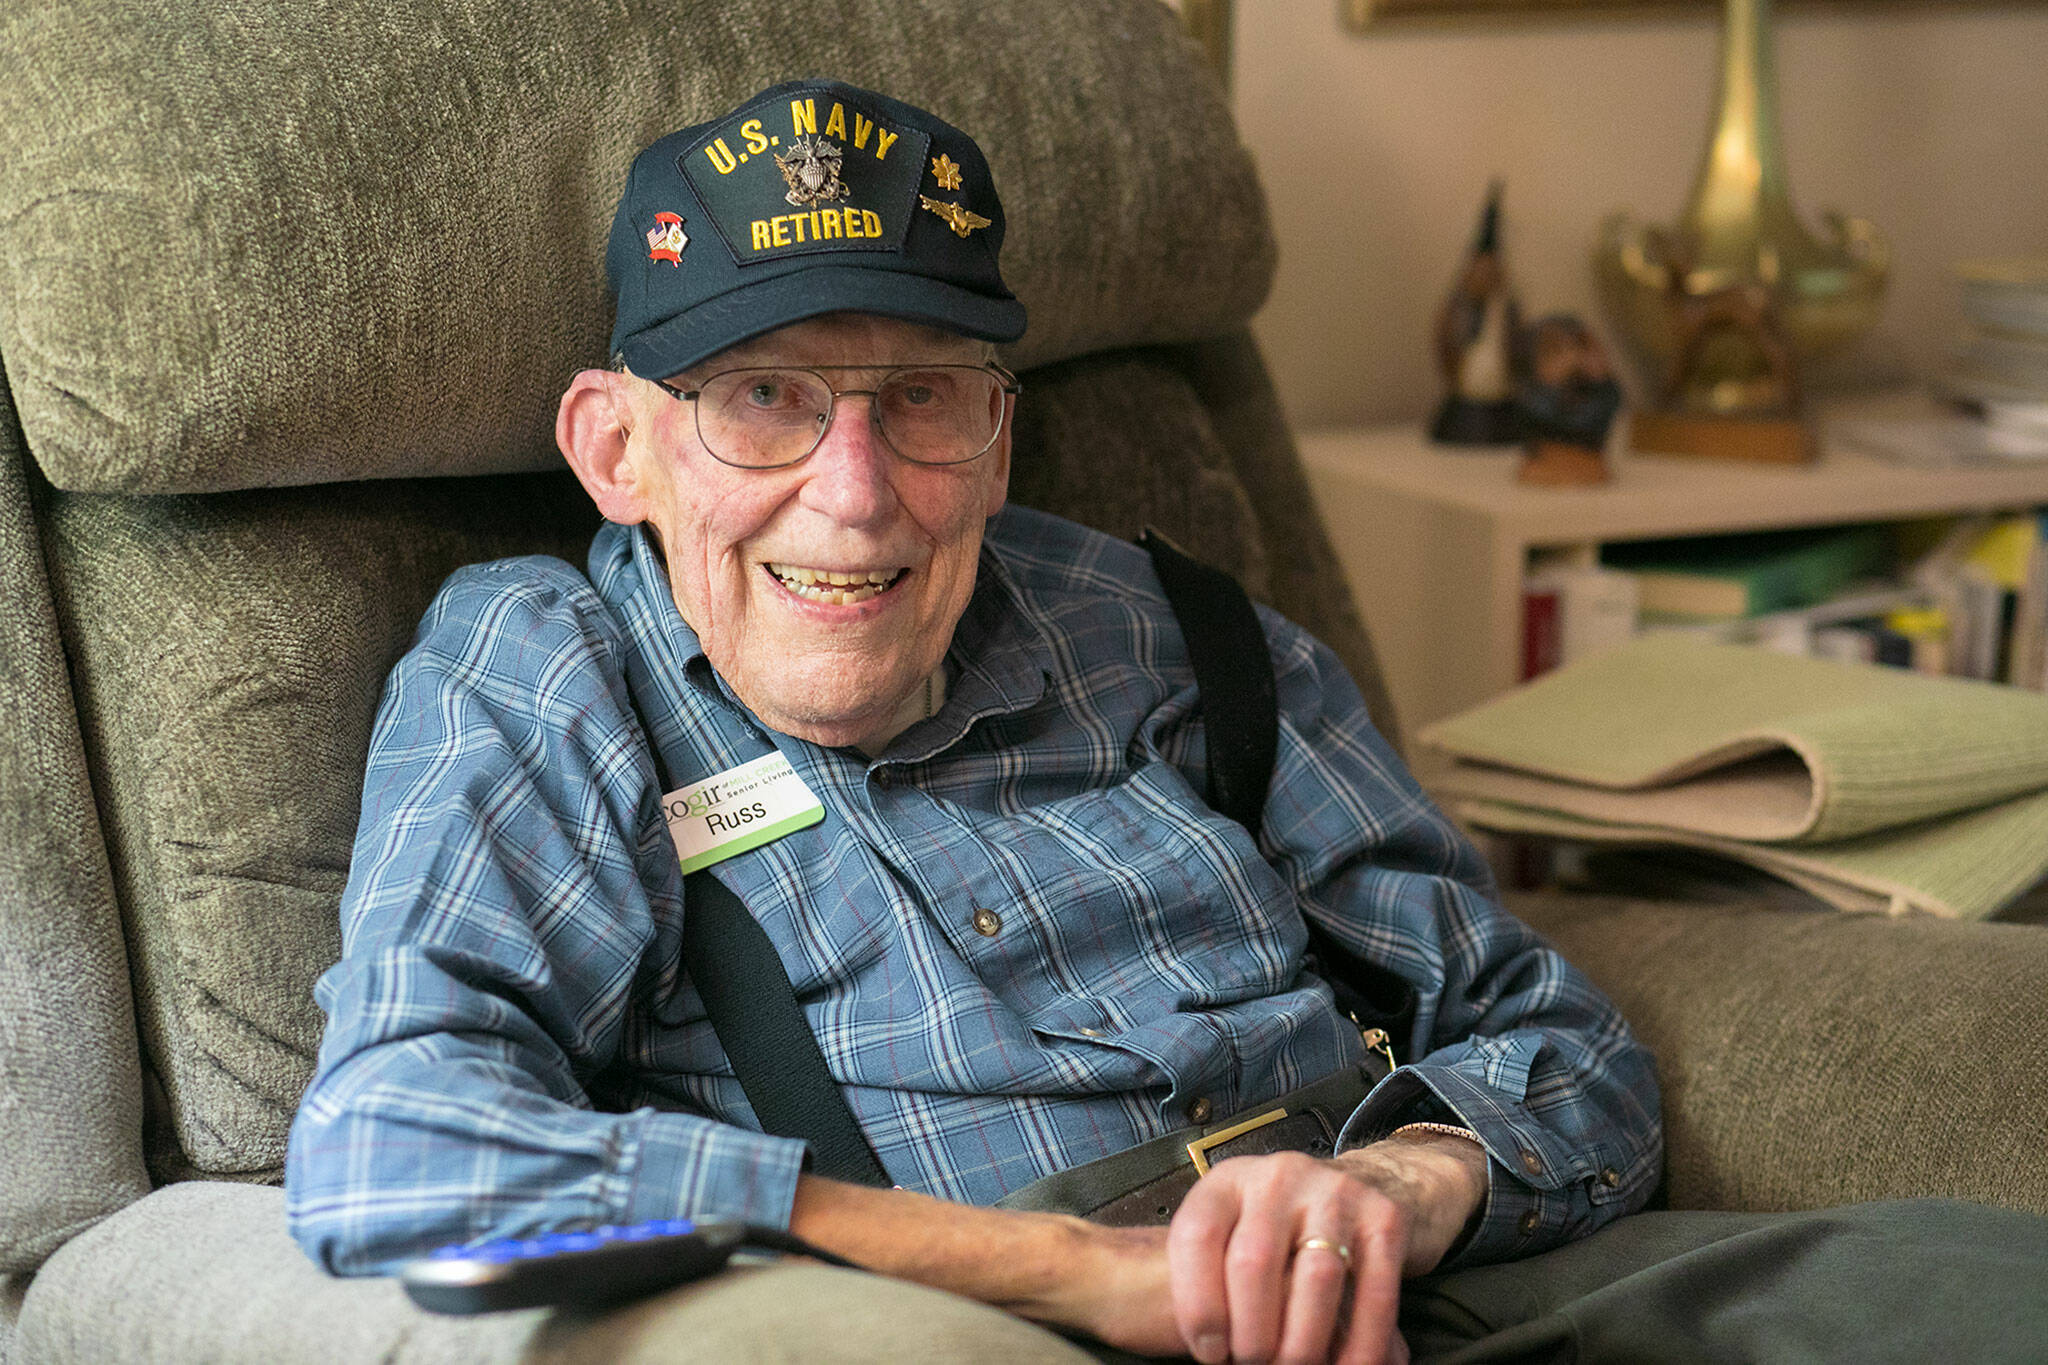 Russ Hupe, a 101-year-old veteran of the U.S. Navy, sits in his “big chair” on Nov. 3, at his home at Cogir Senior Living in Mill Creek. Hupe was Grand Marshal for Mill Creek’s Veterans Day ceremony this year. When asked if he ever anticipated being recognized for his service in WWII, he said with a laugh, “it wasn’t on my agenda.” (Ryan Berry / The Herald)